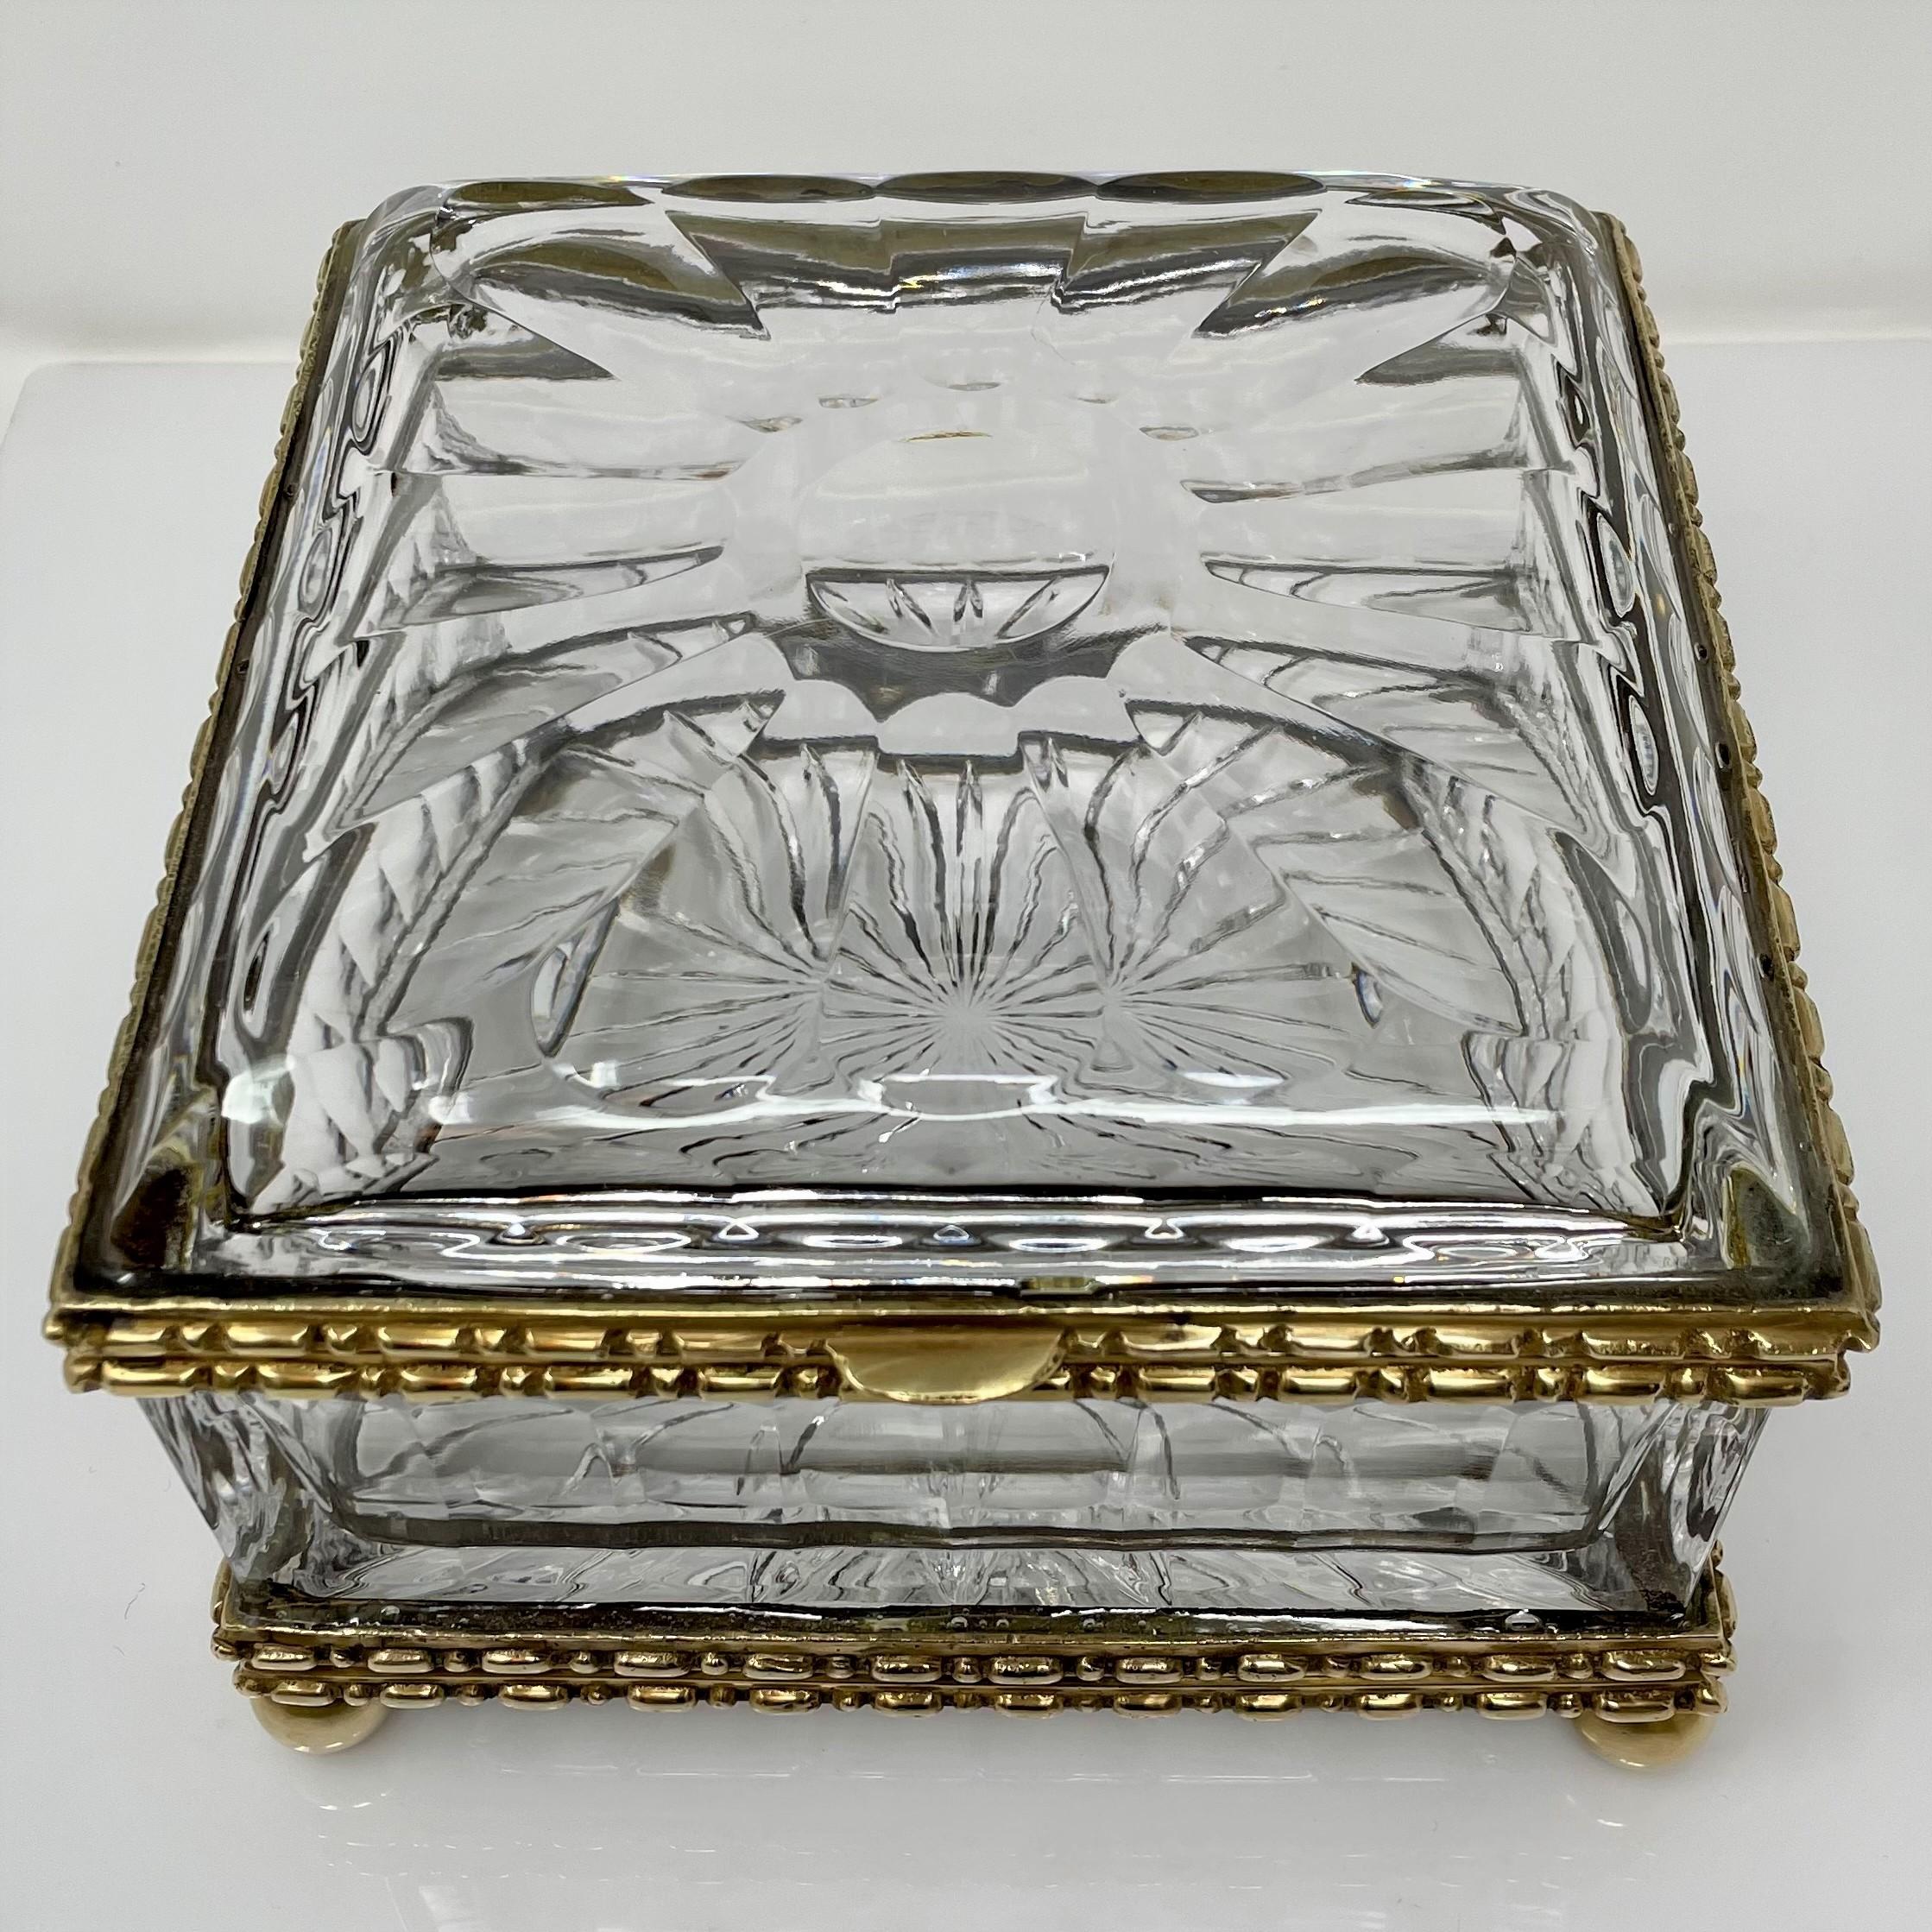 Large antique French cut crystal and bronze D' Ore jewel box, Circa 1900.